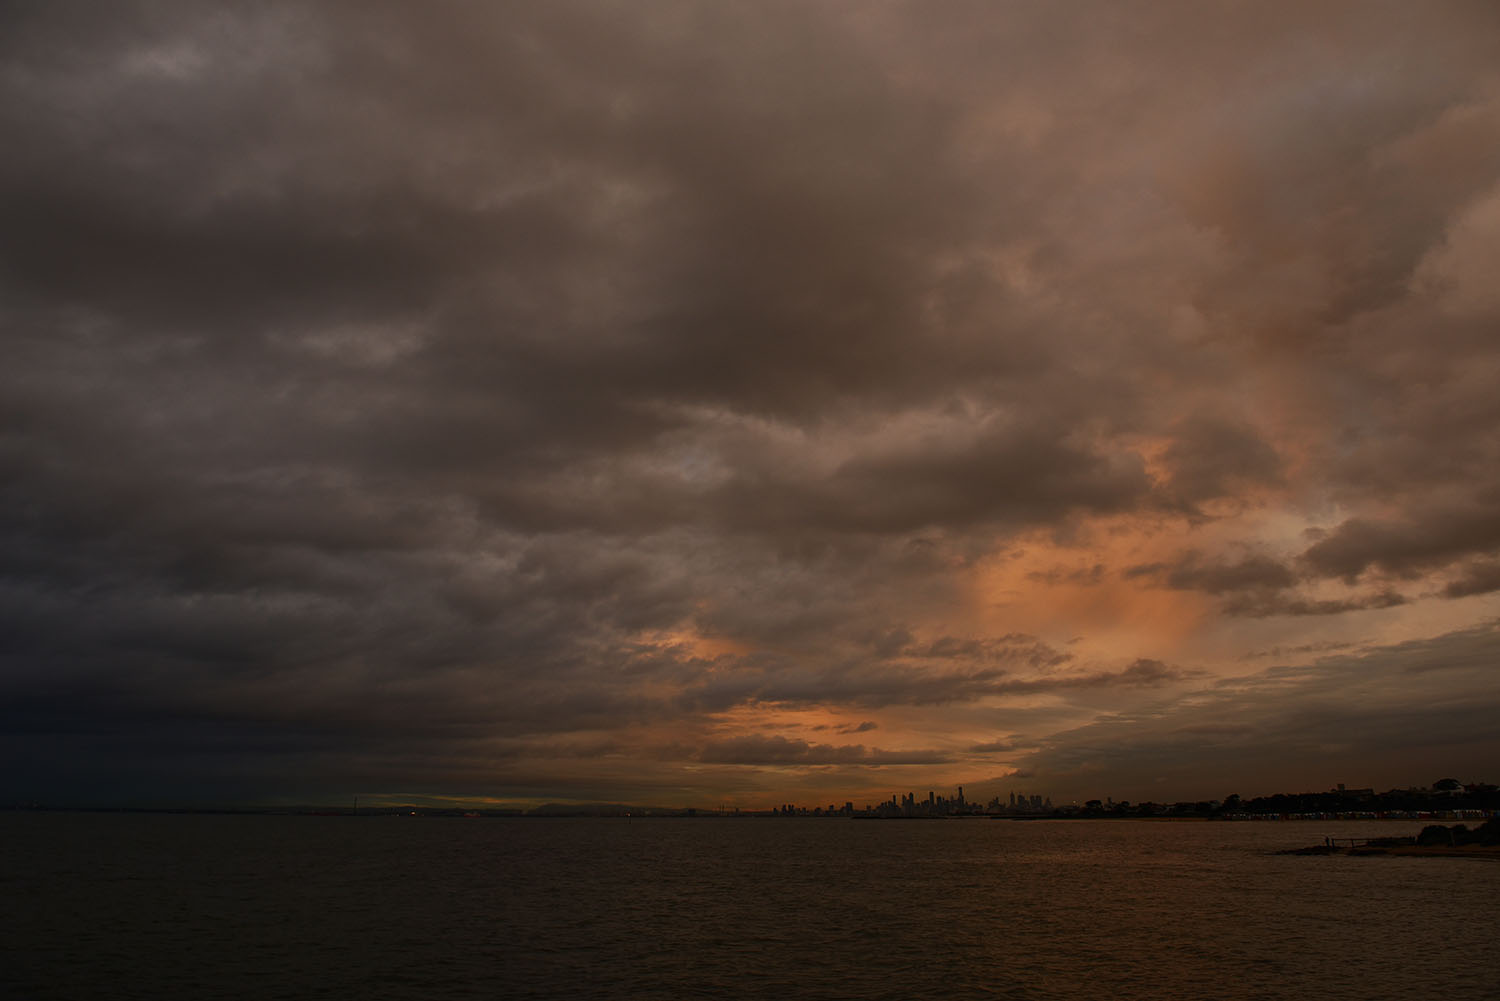 Rob Love Photography, Melbourne. Photo of Landscape at Twilight